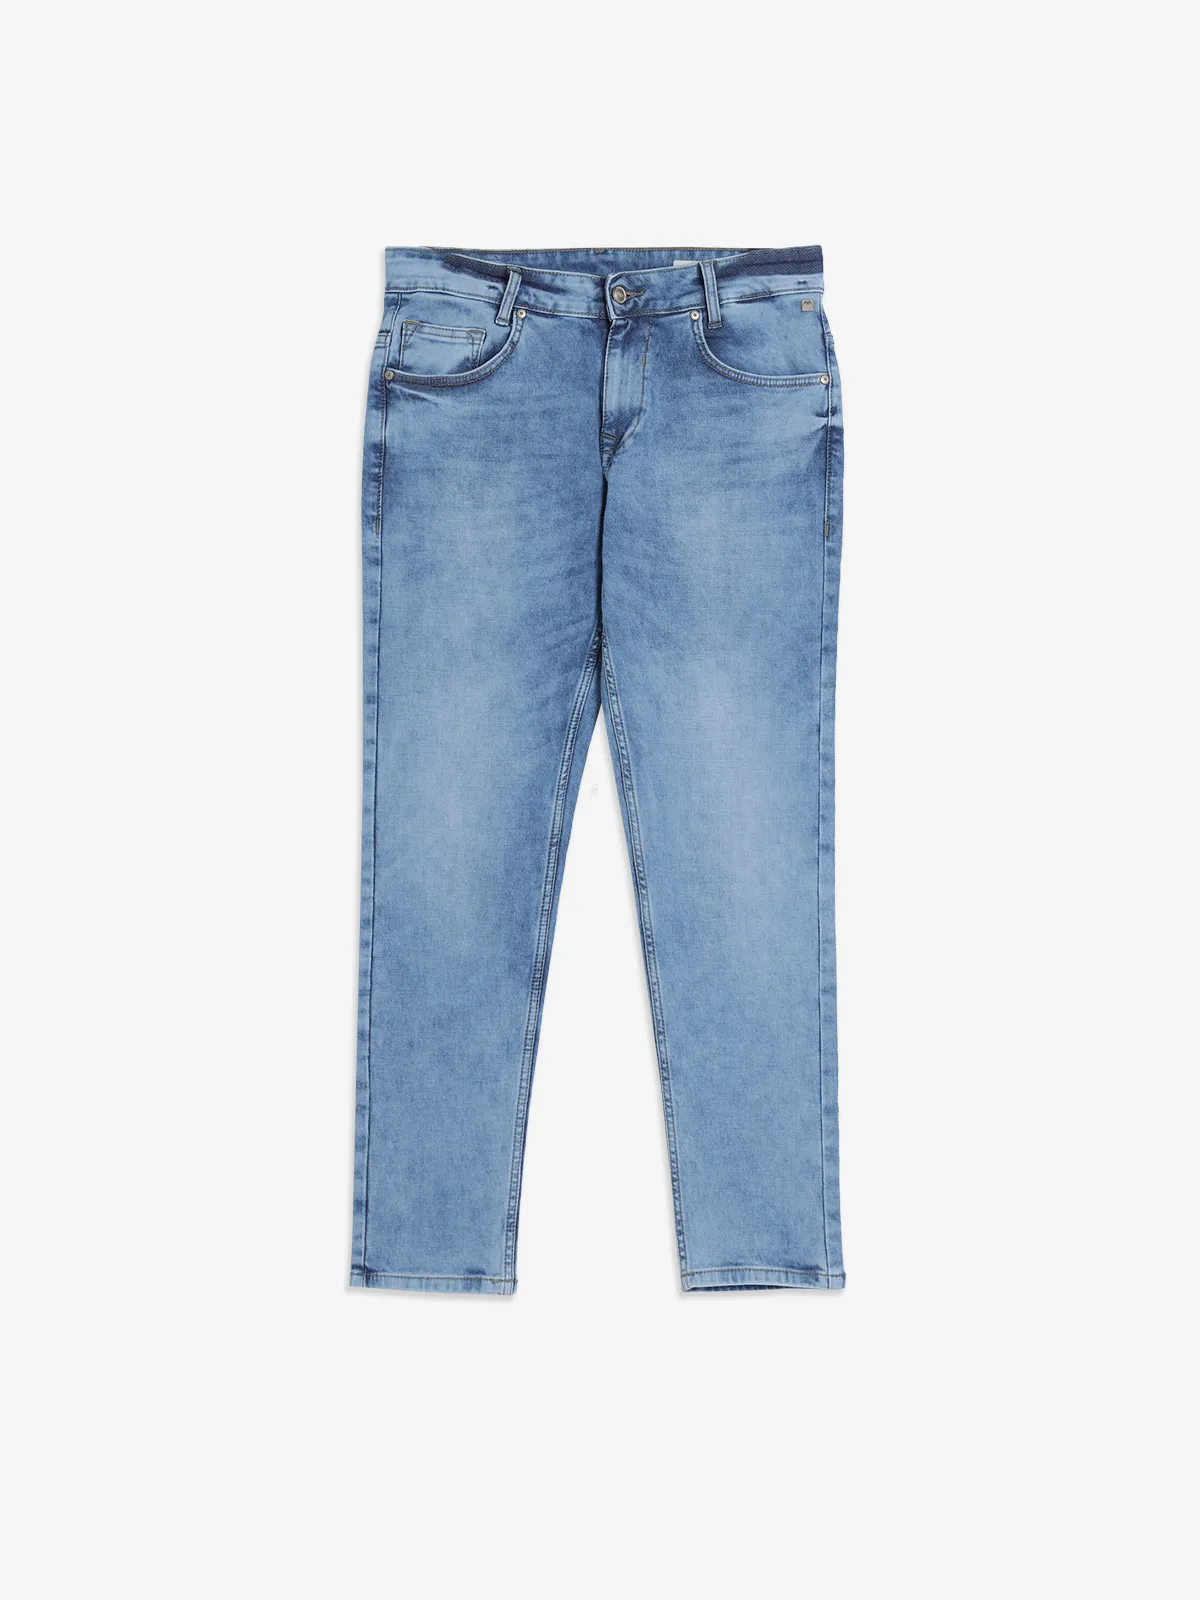 MUFTI light blue ankle length jeans